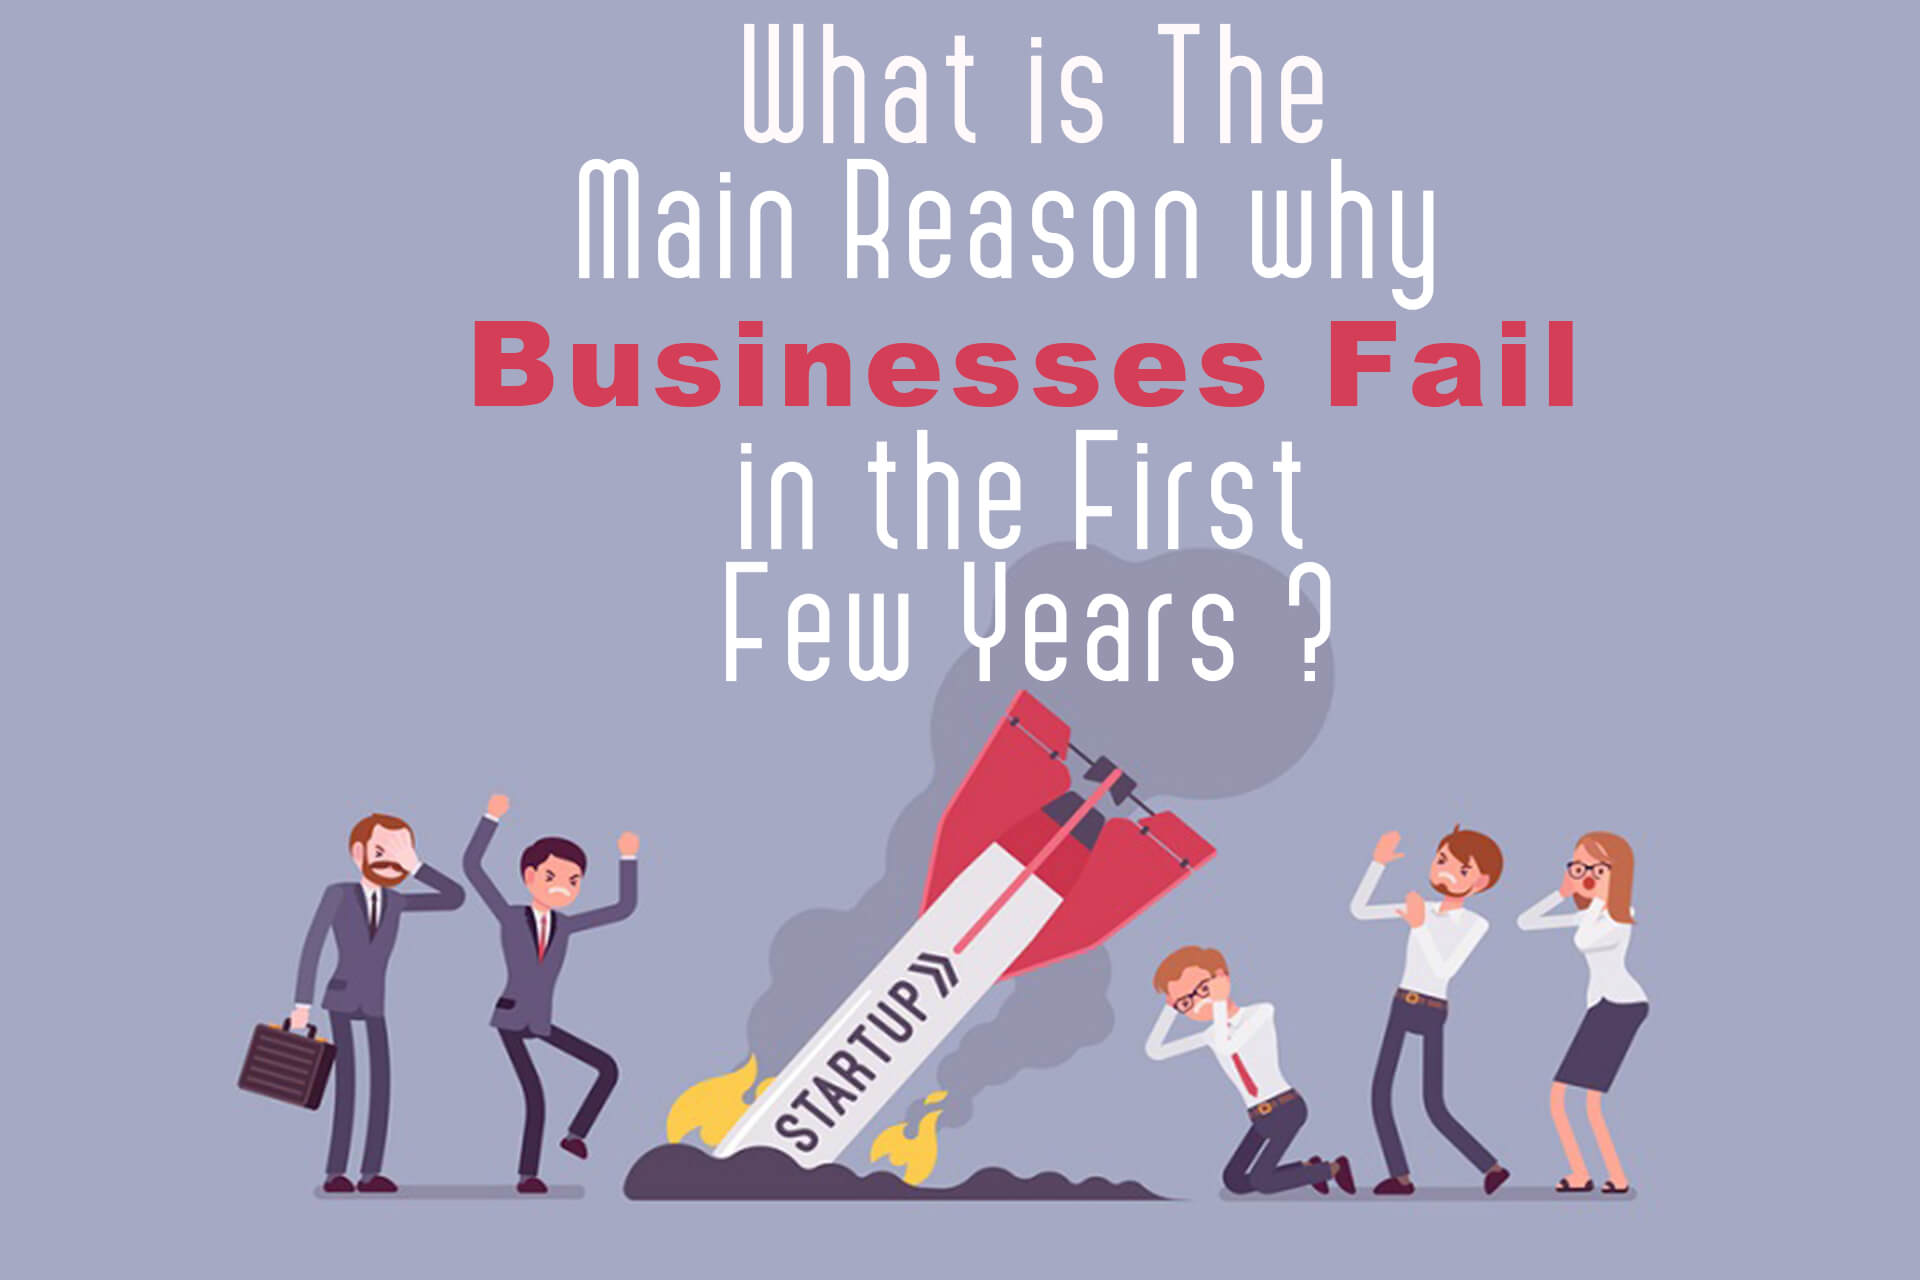 What Is The Main Reason Why Businesses Fail In The First Few Years?